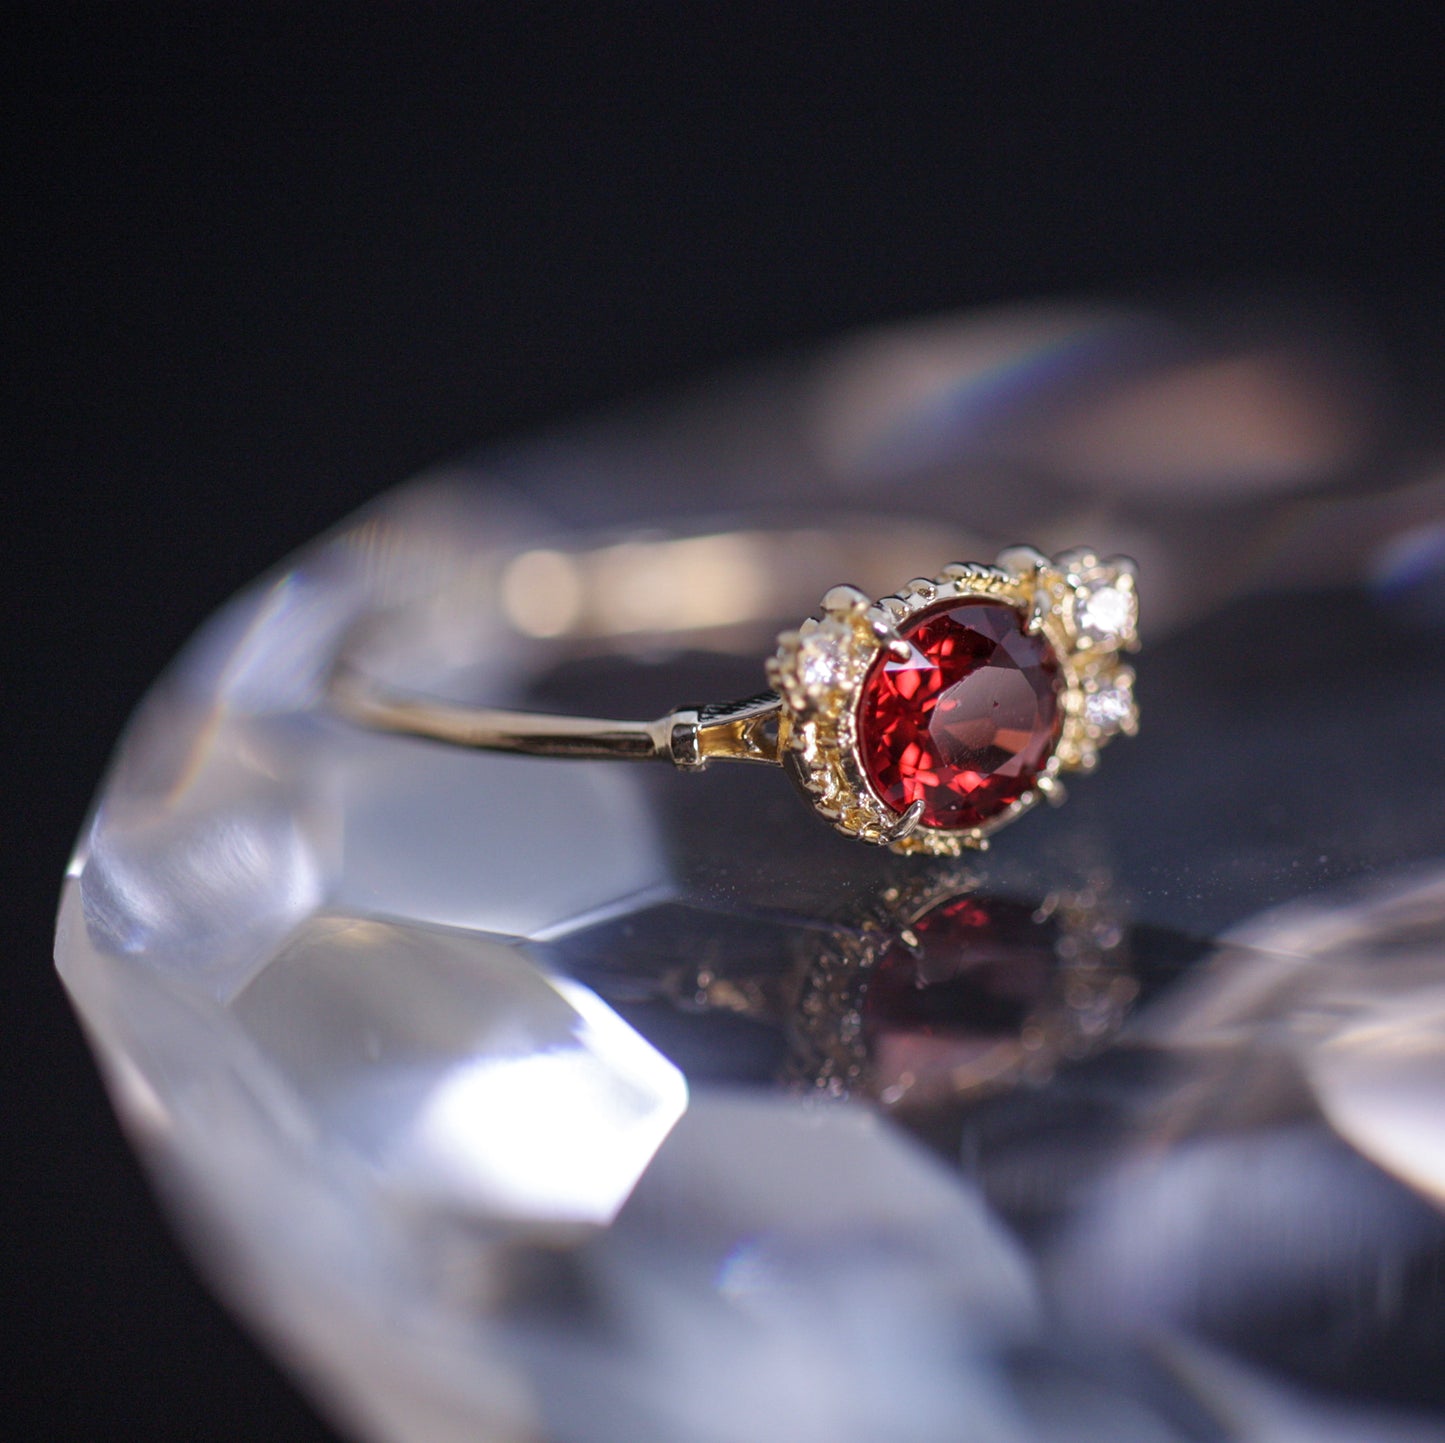 152 Red spinel / Diamond Ring